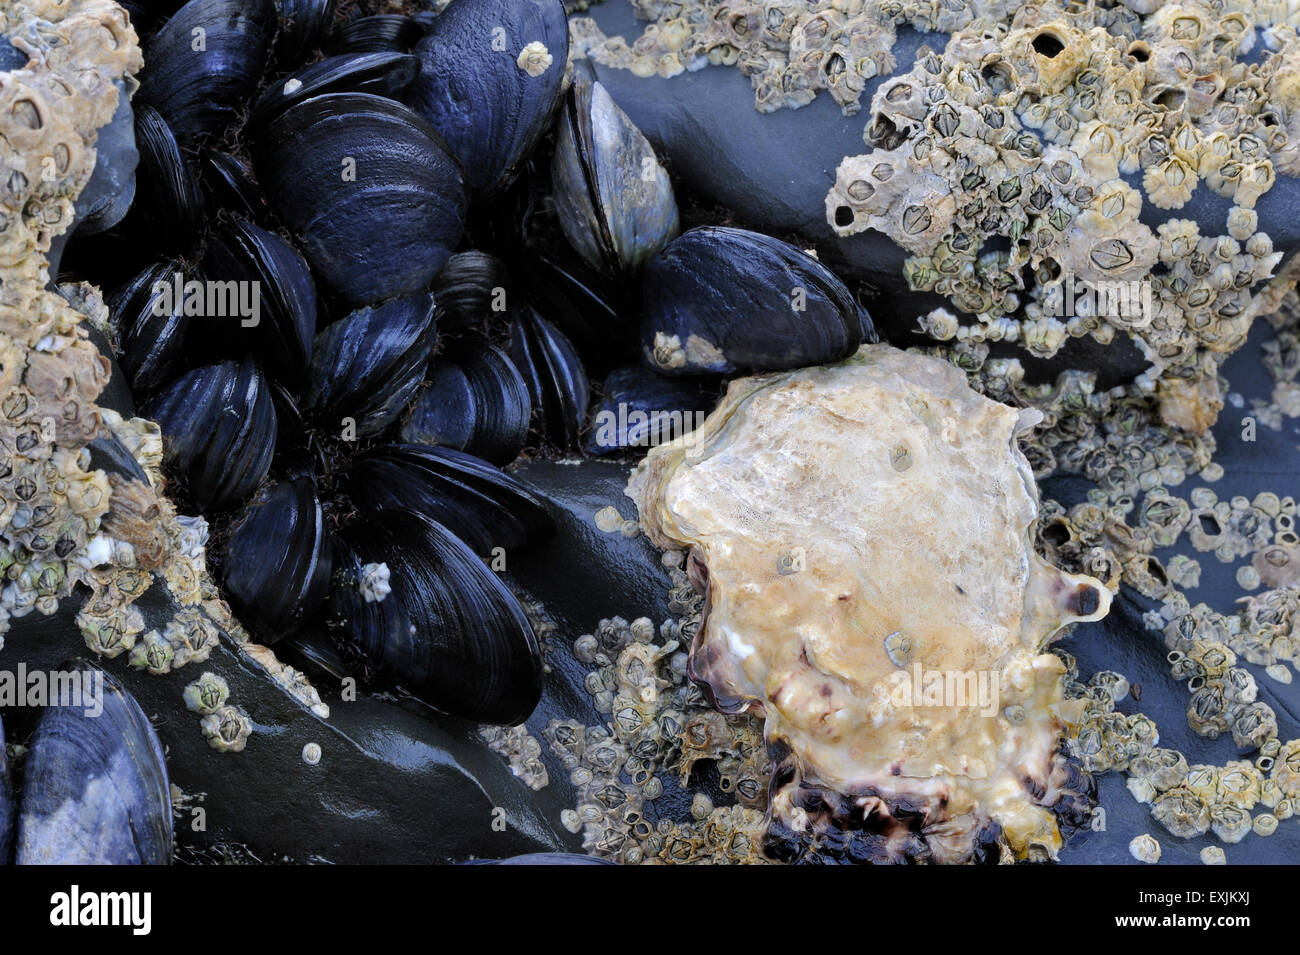 Pacific oyster / Japanese oyster / Miyagi oyster (Crassostrea gigas), barnacles and mussels growing on rock in intertidal zone Stock Photo